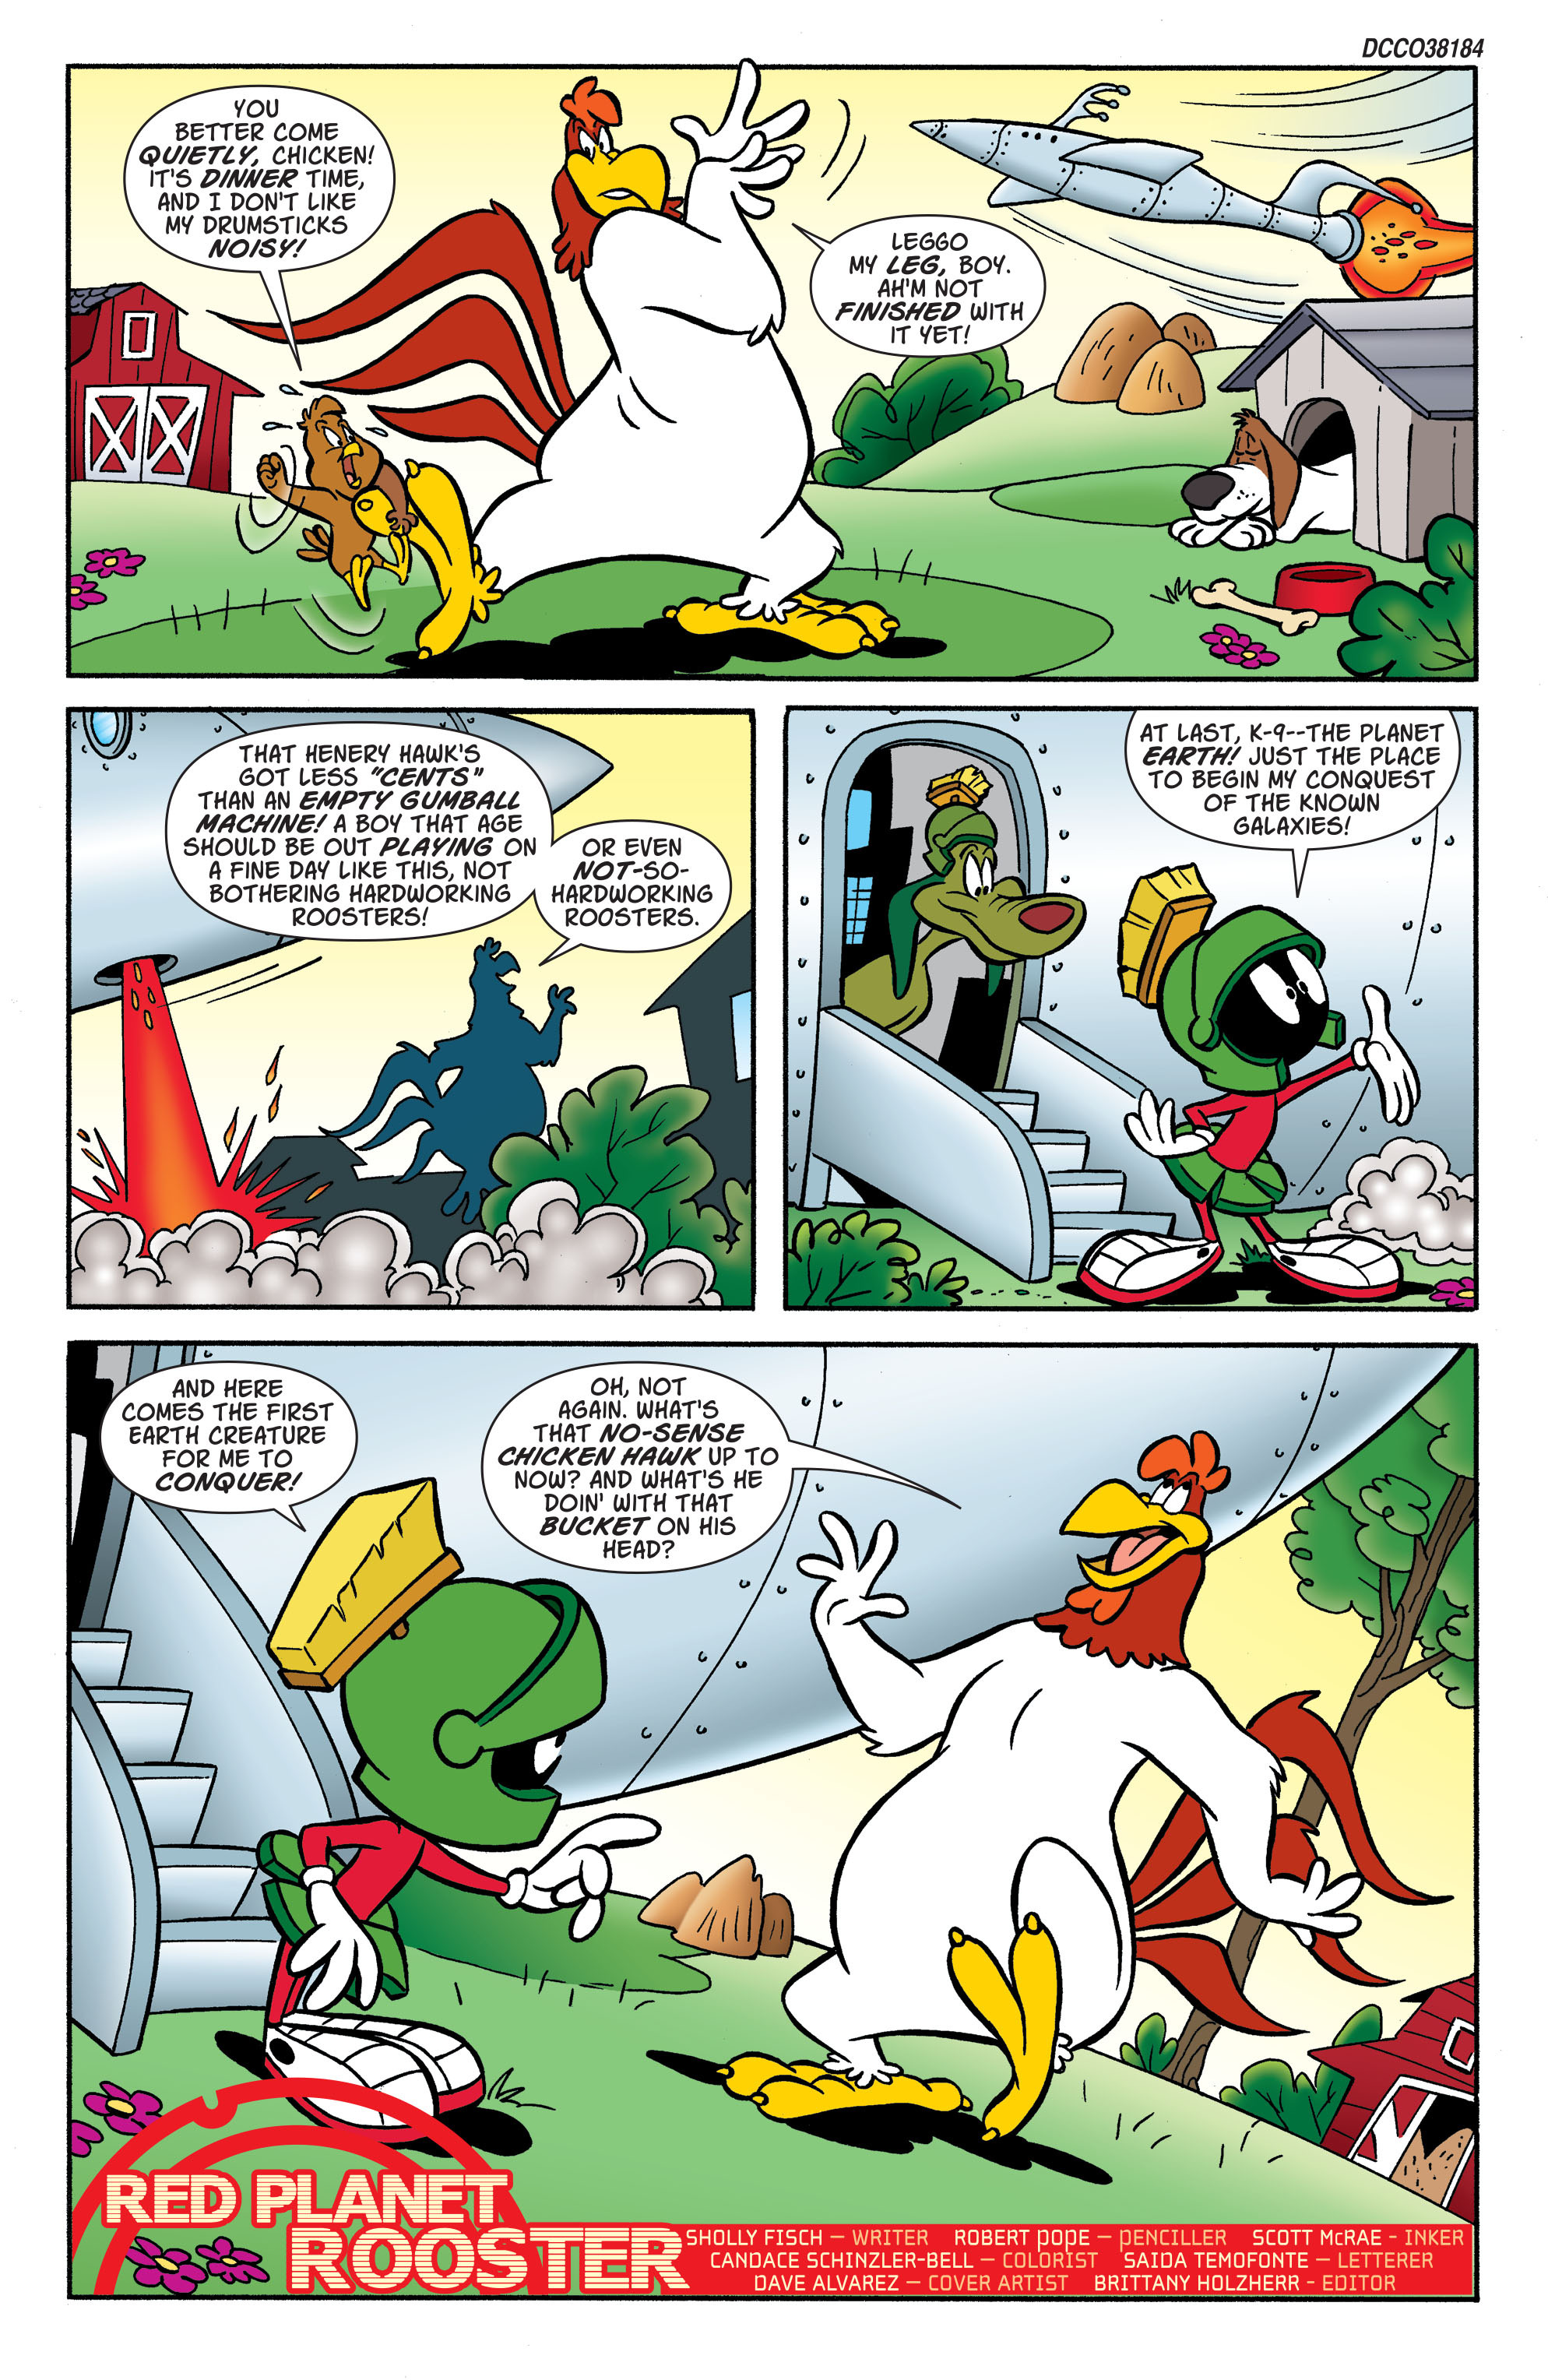 Looney Tunes (1994-): Chapter 233 - Page 2